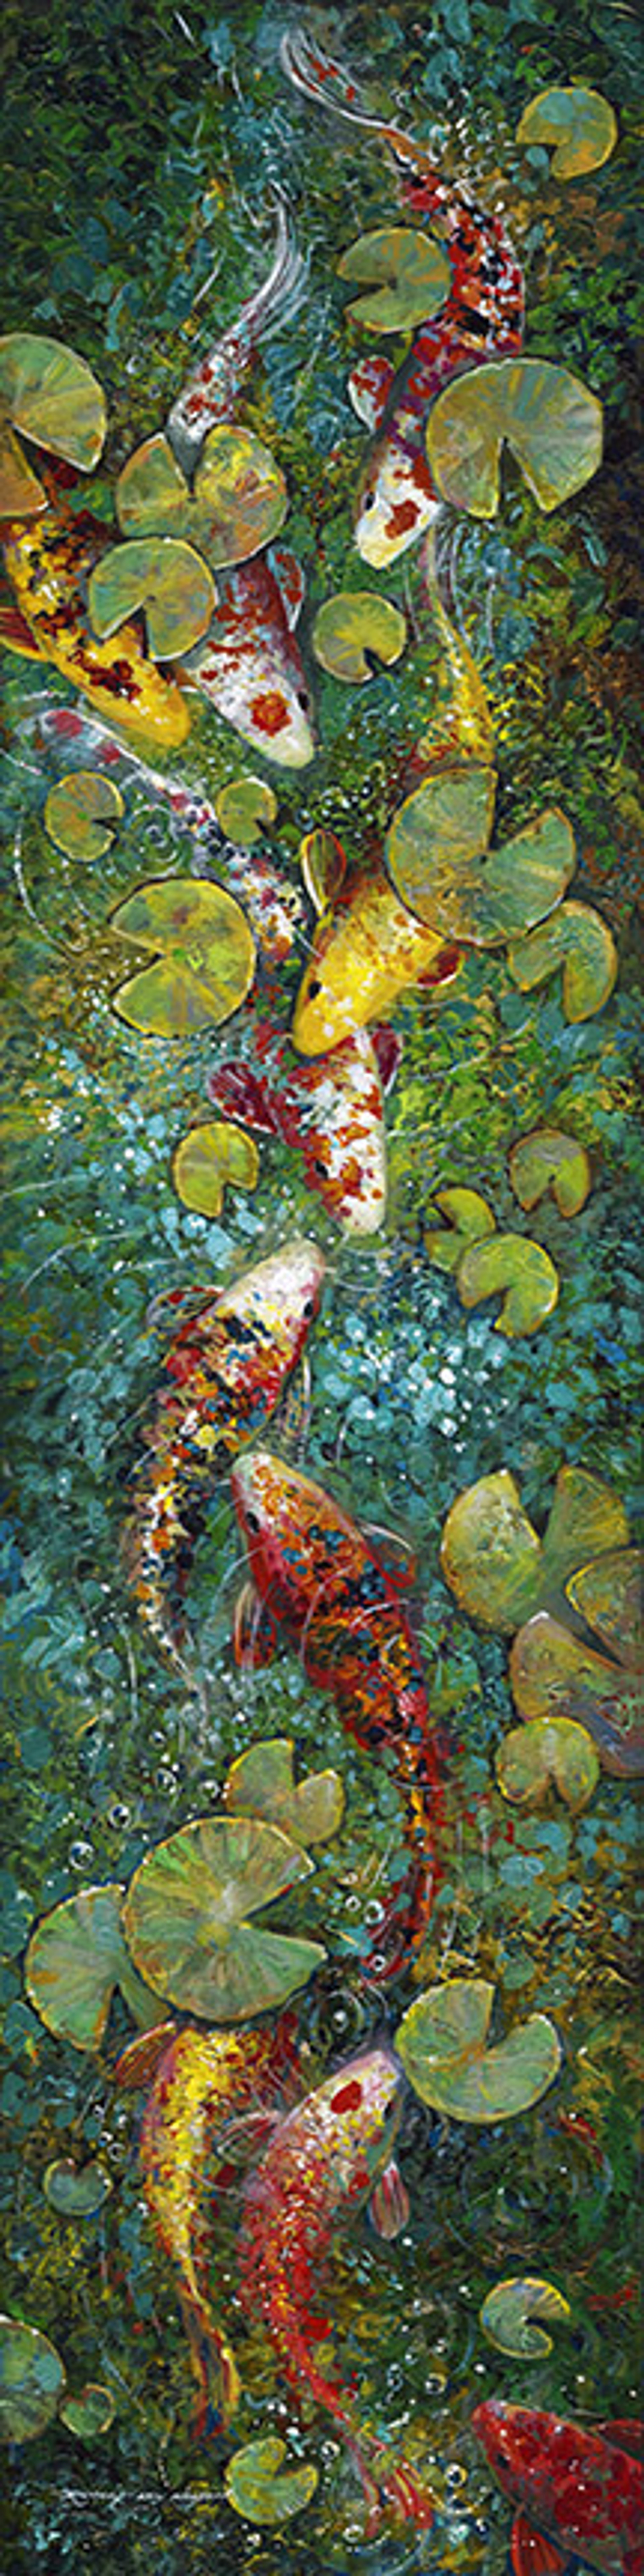 Koi Tranquility by Robert Lyn Nelson